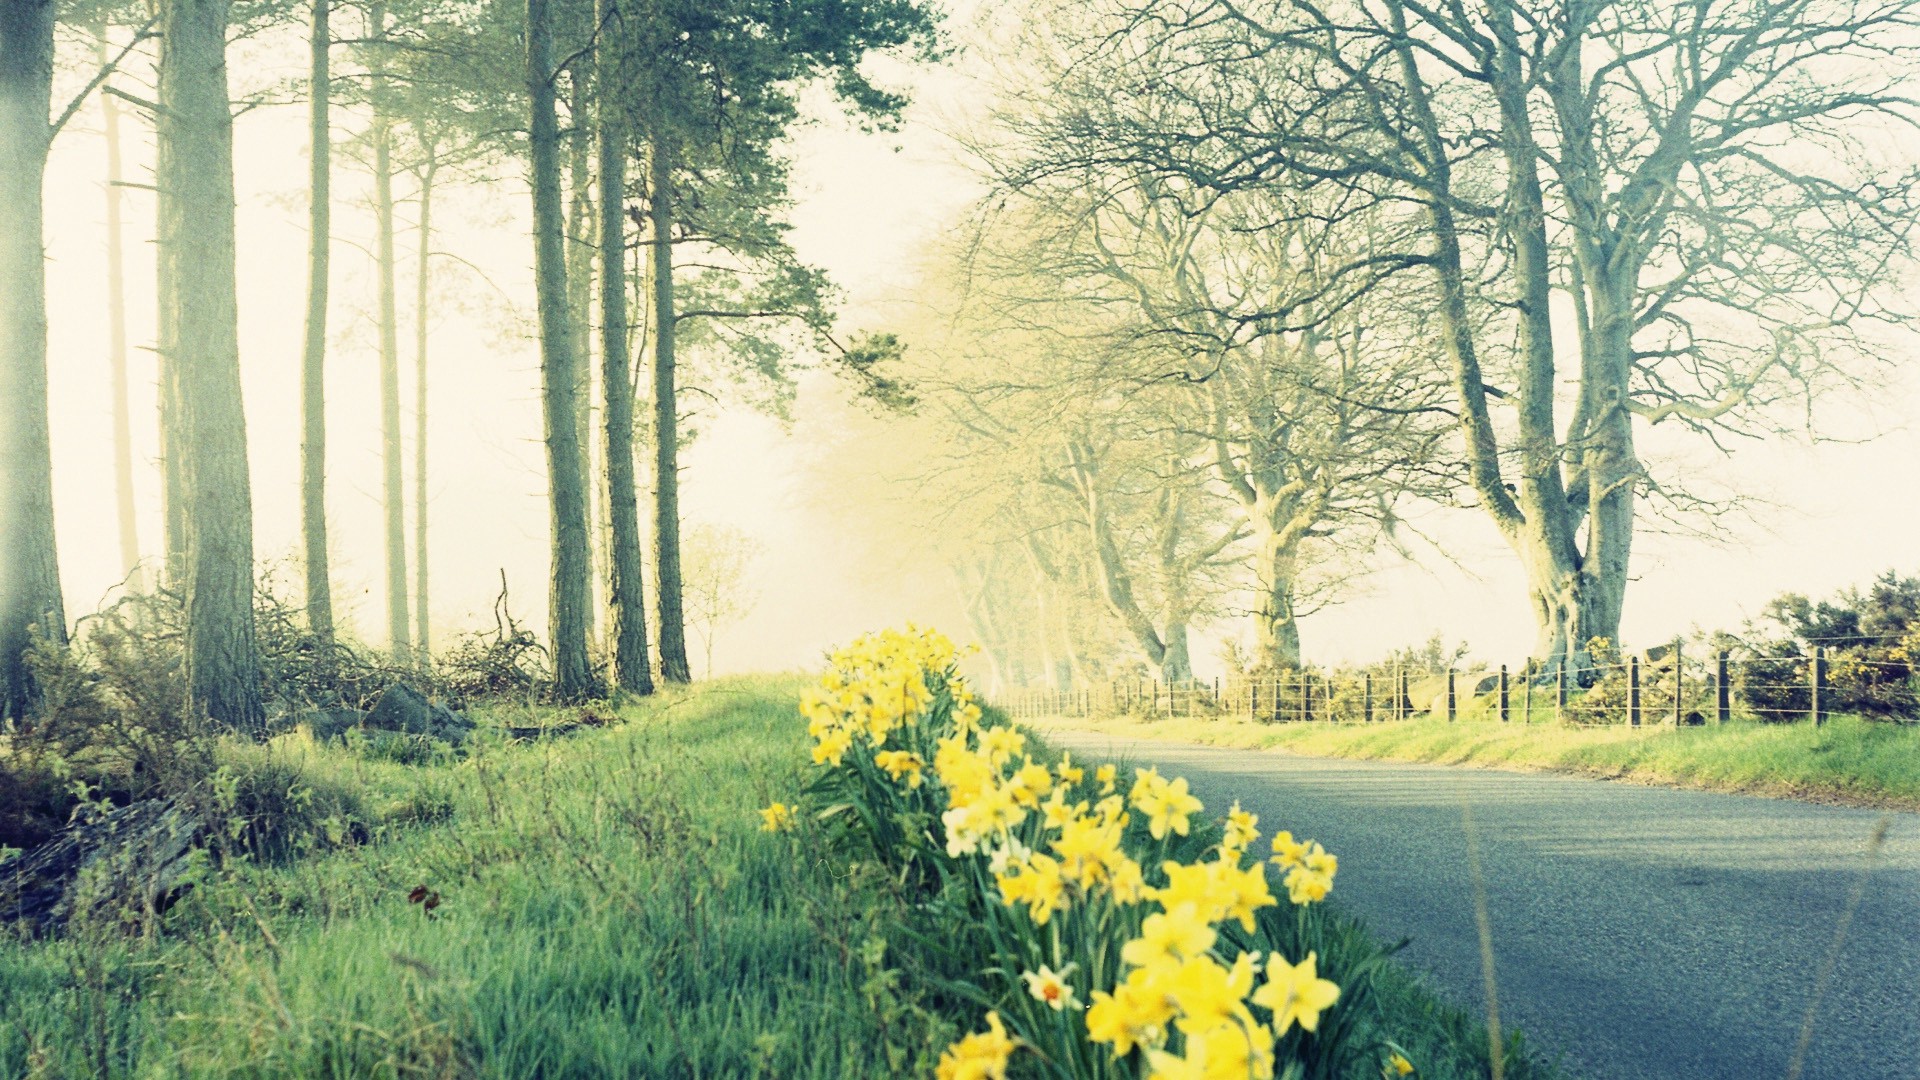 1920x1080 wallpapers: flowers, nature, road, good (image)